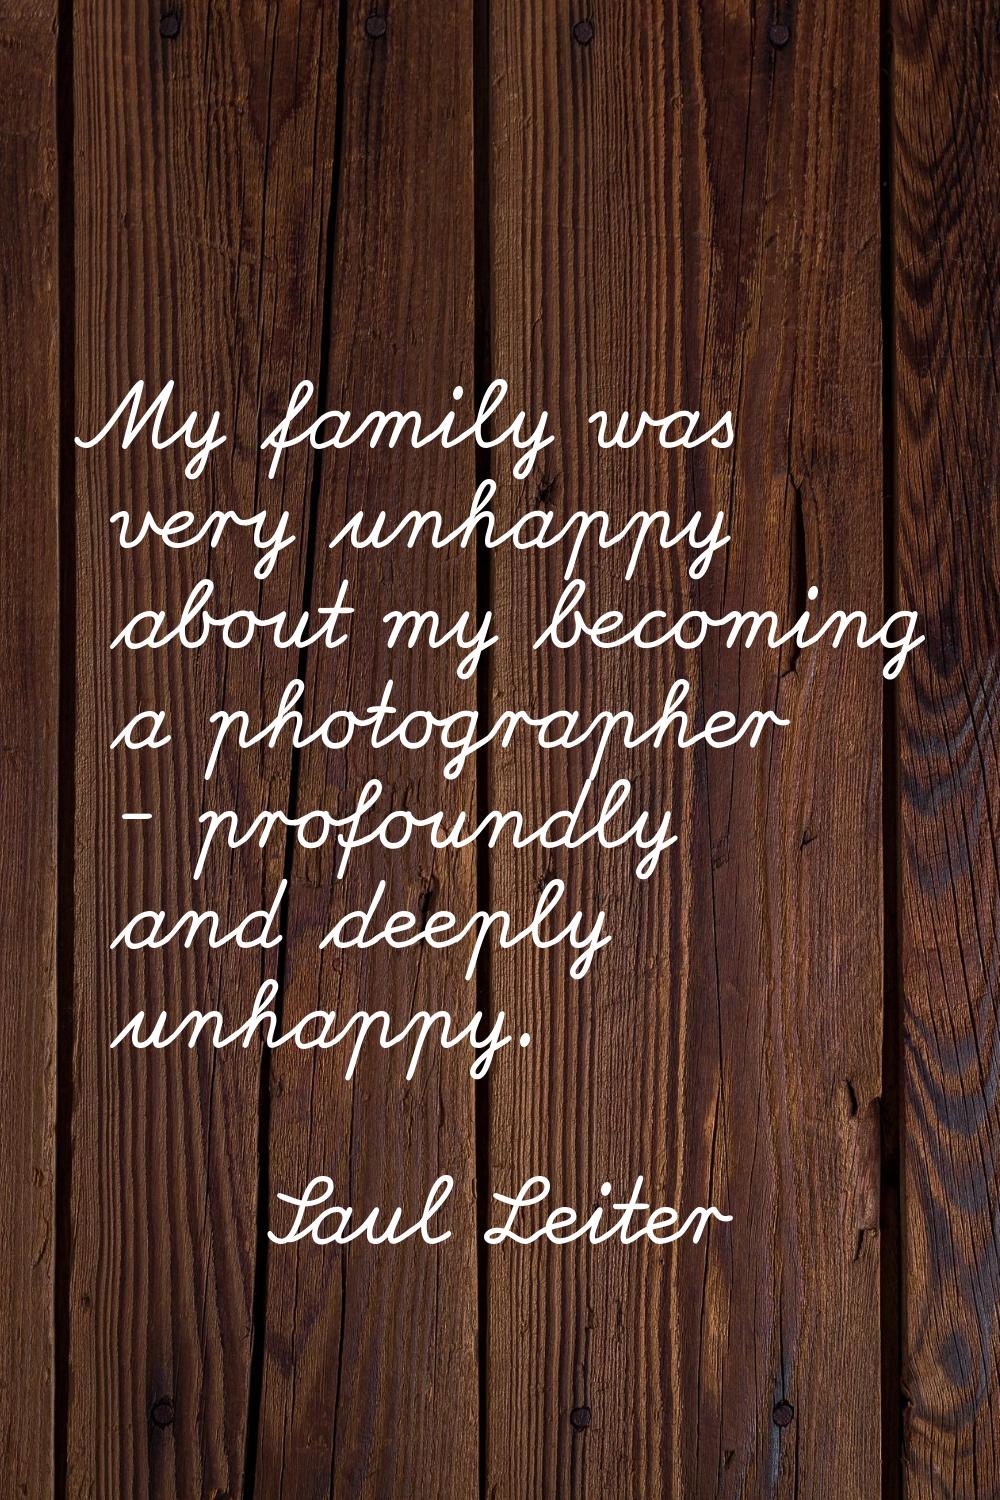 My family was very unhappy about my becoming a photographer - profoundly and deeply unhappy.